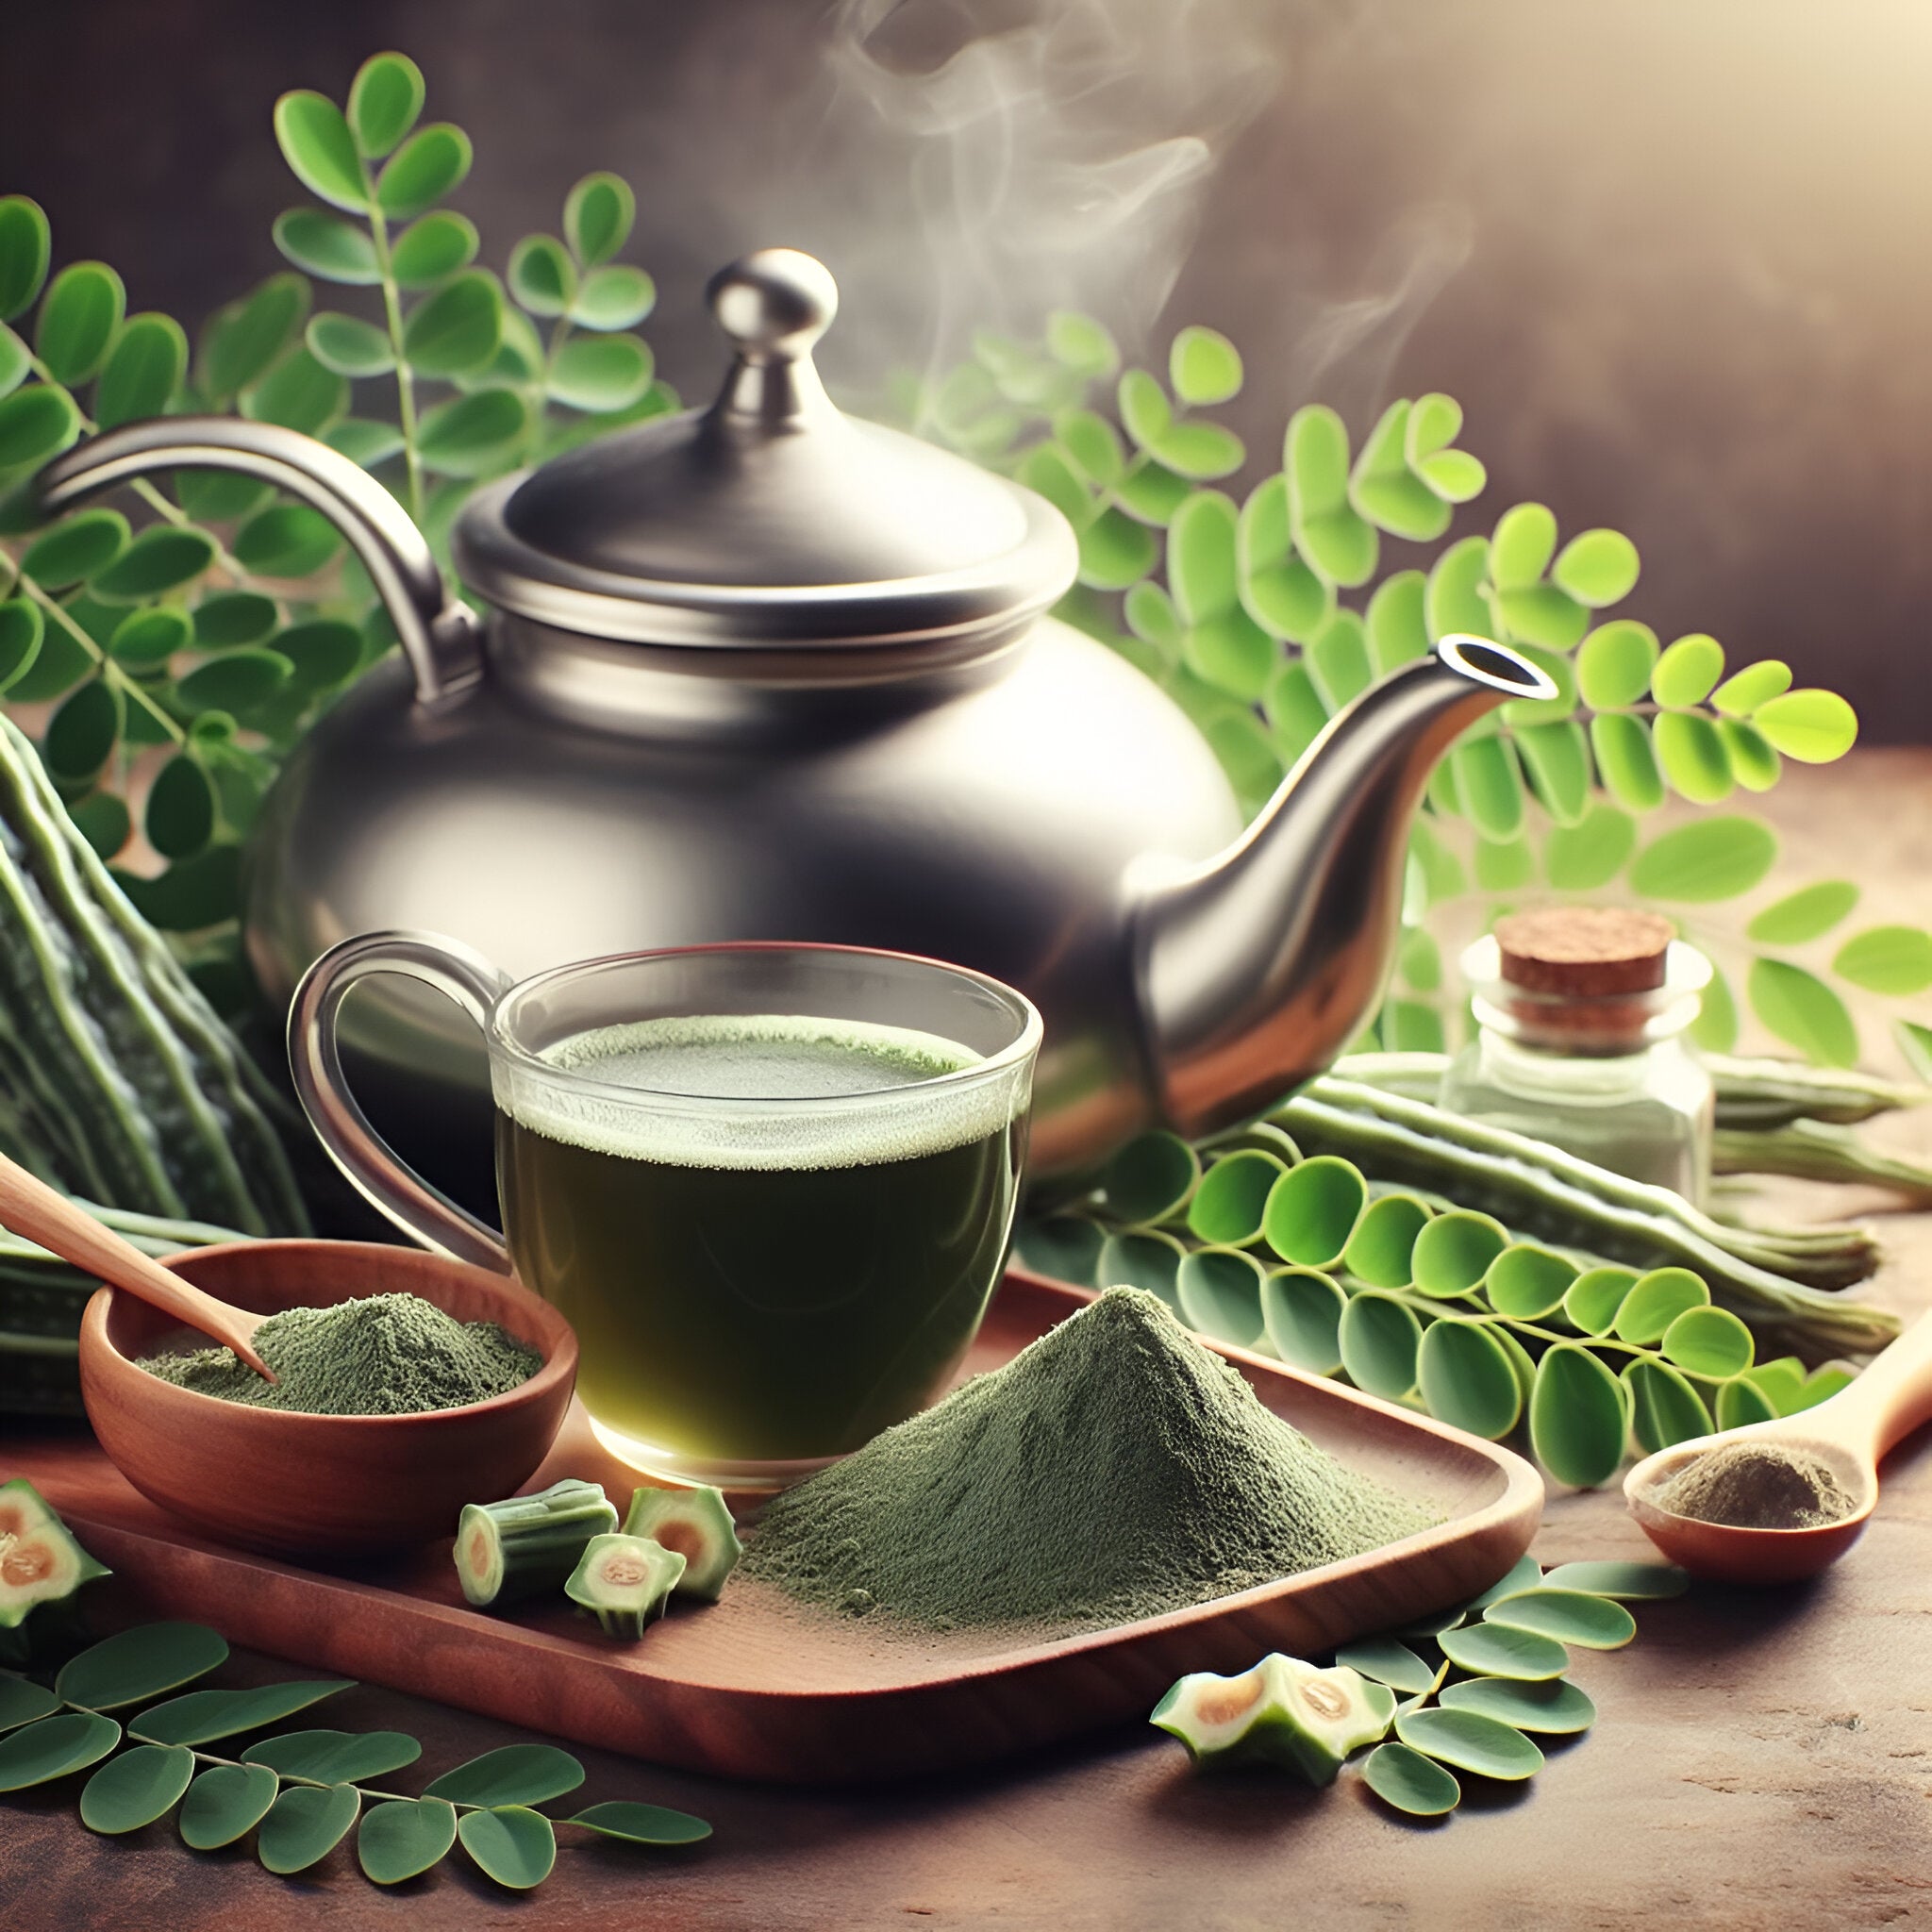 Can I boil moringa powder and drink it?